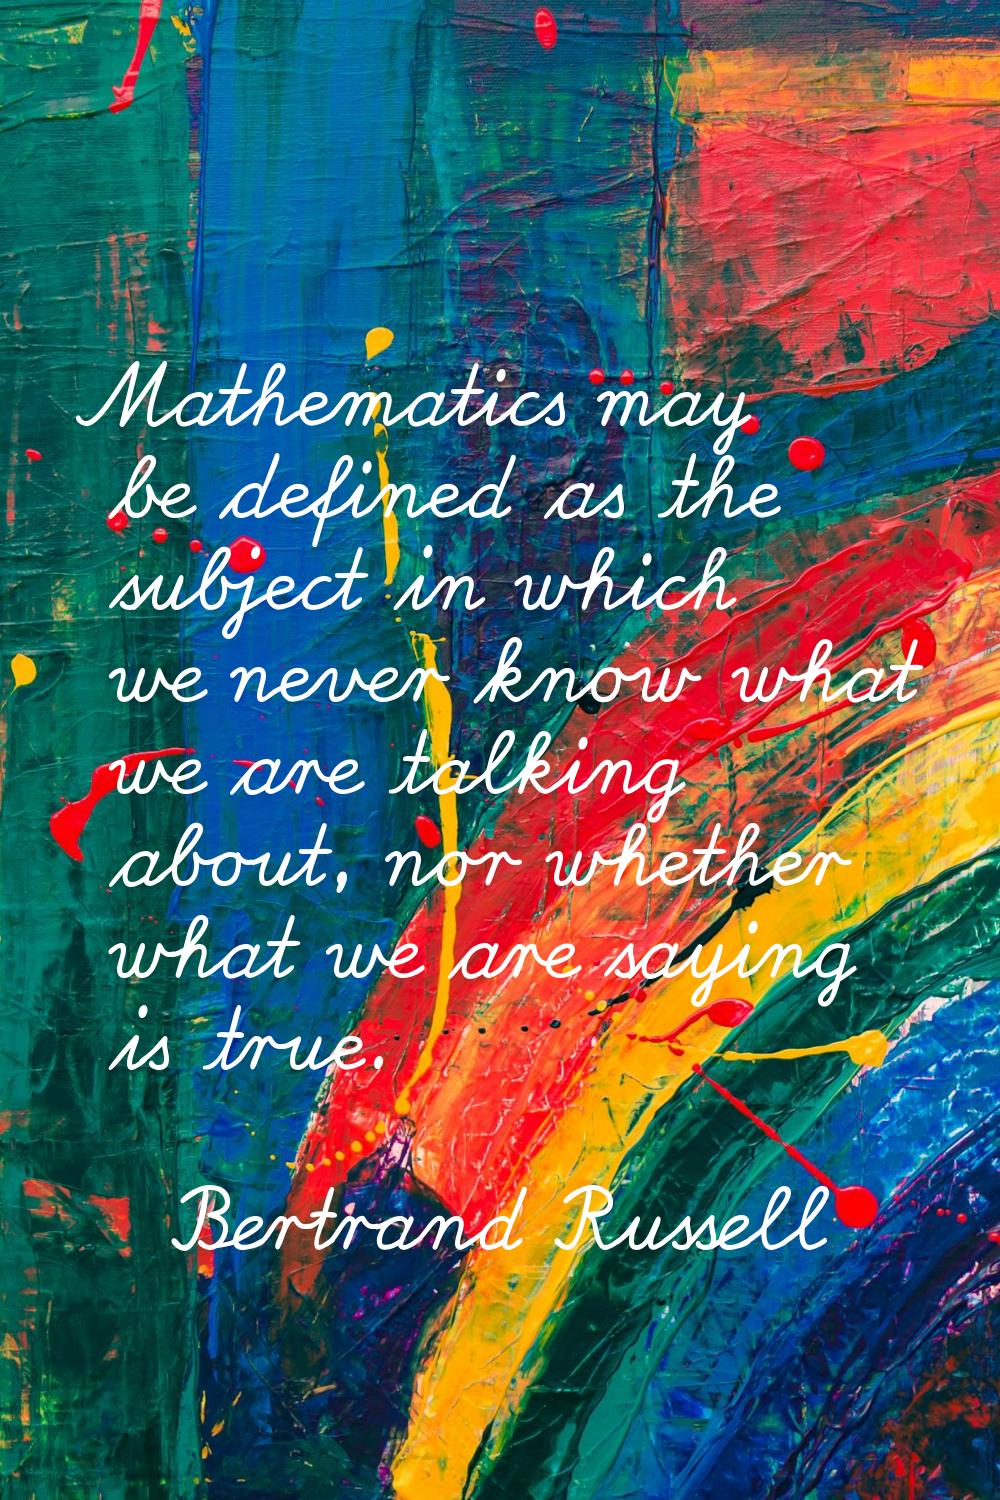 Mathematics may be defined as the subject in which we never know what we are talking about, nor whe